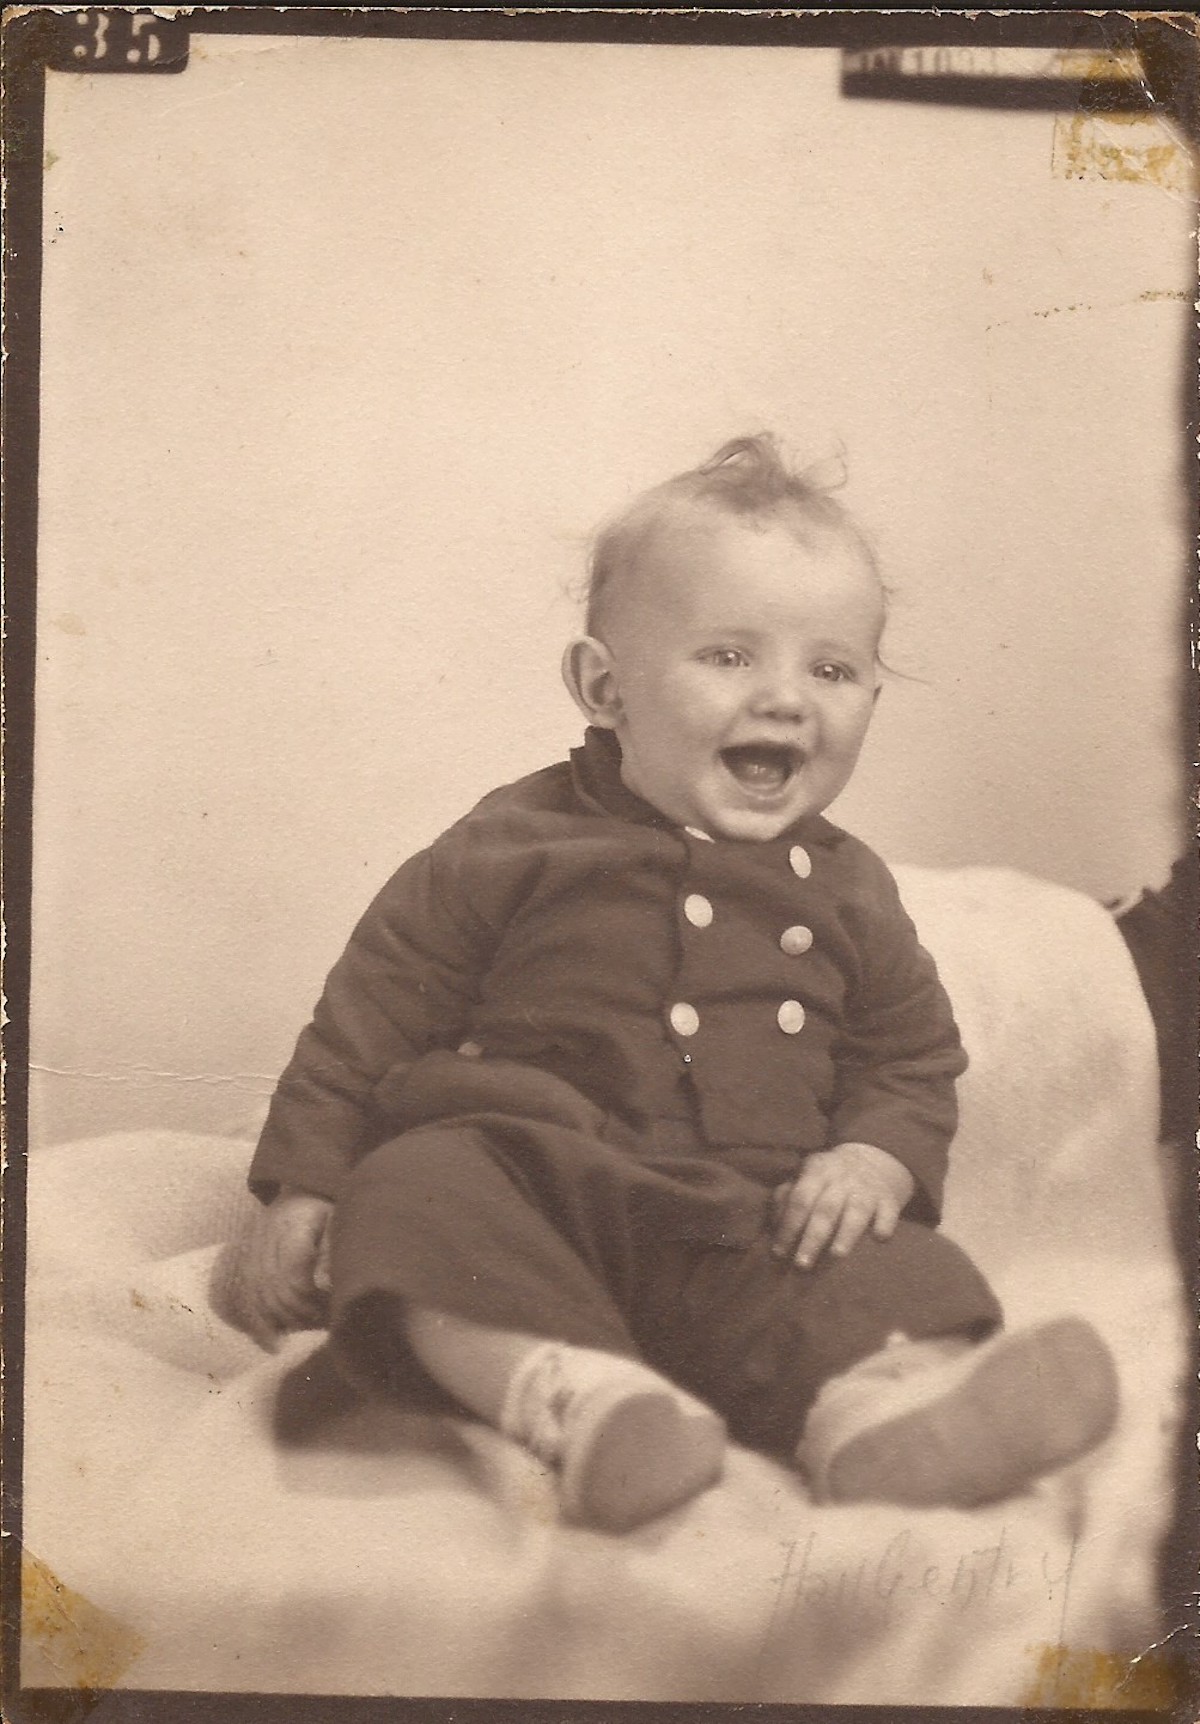 A portrait of Jack as a baby. Photo courtesy of Jack Myers.